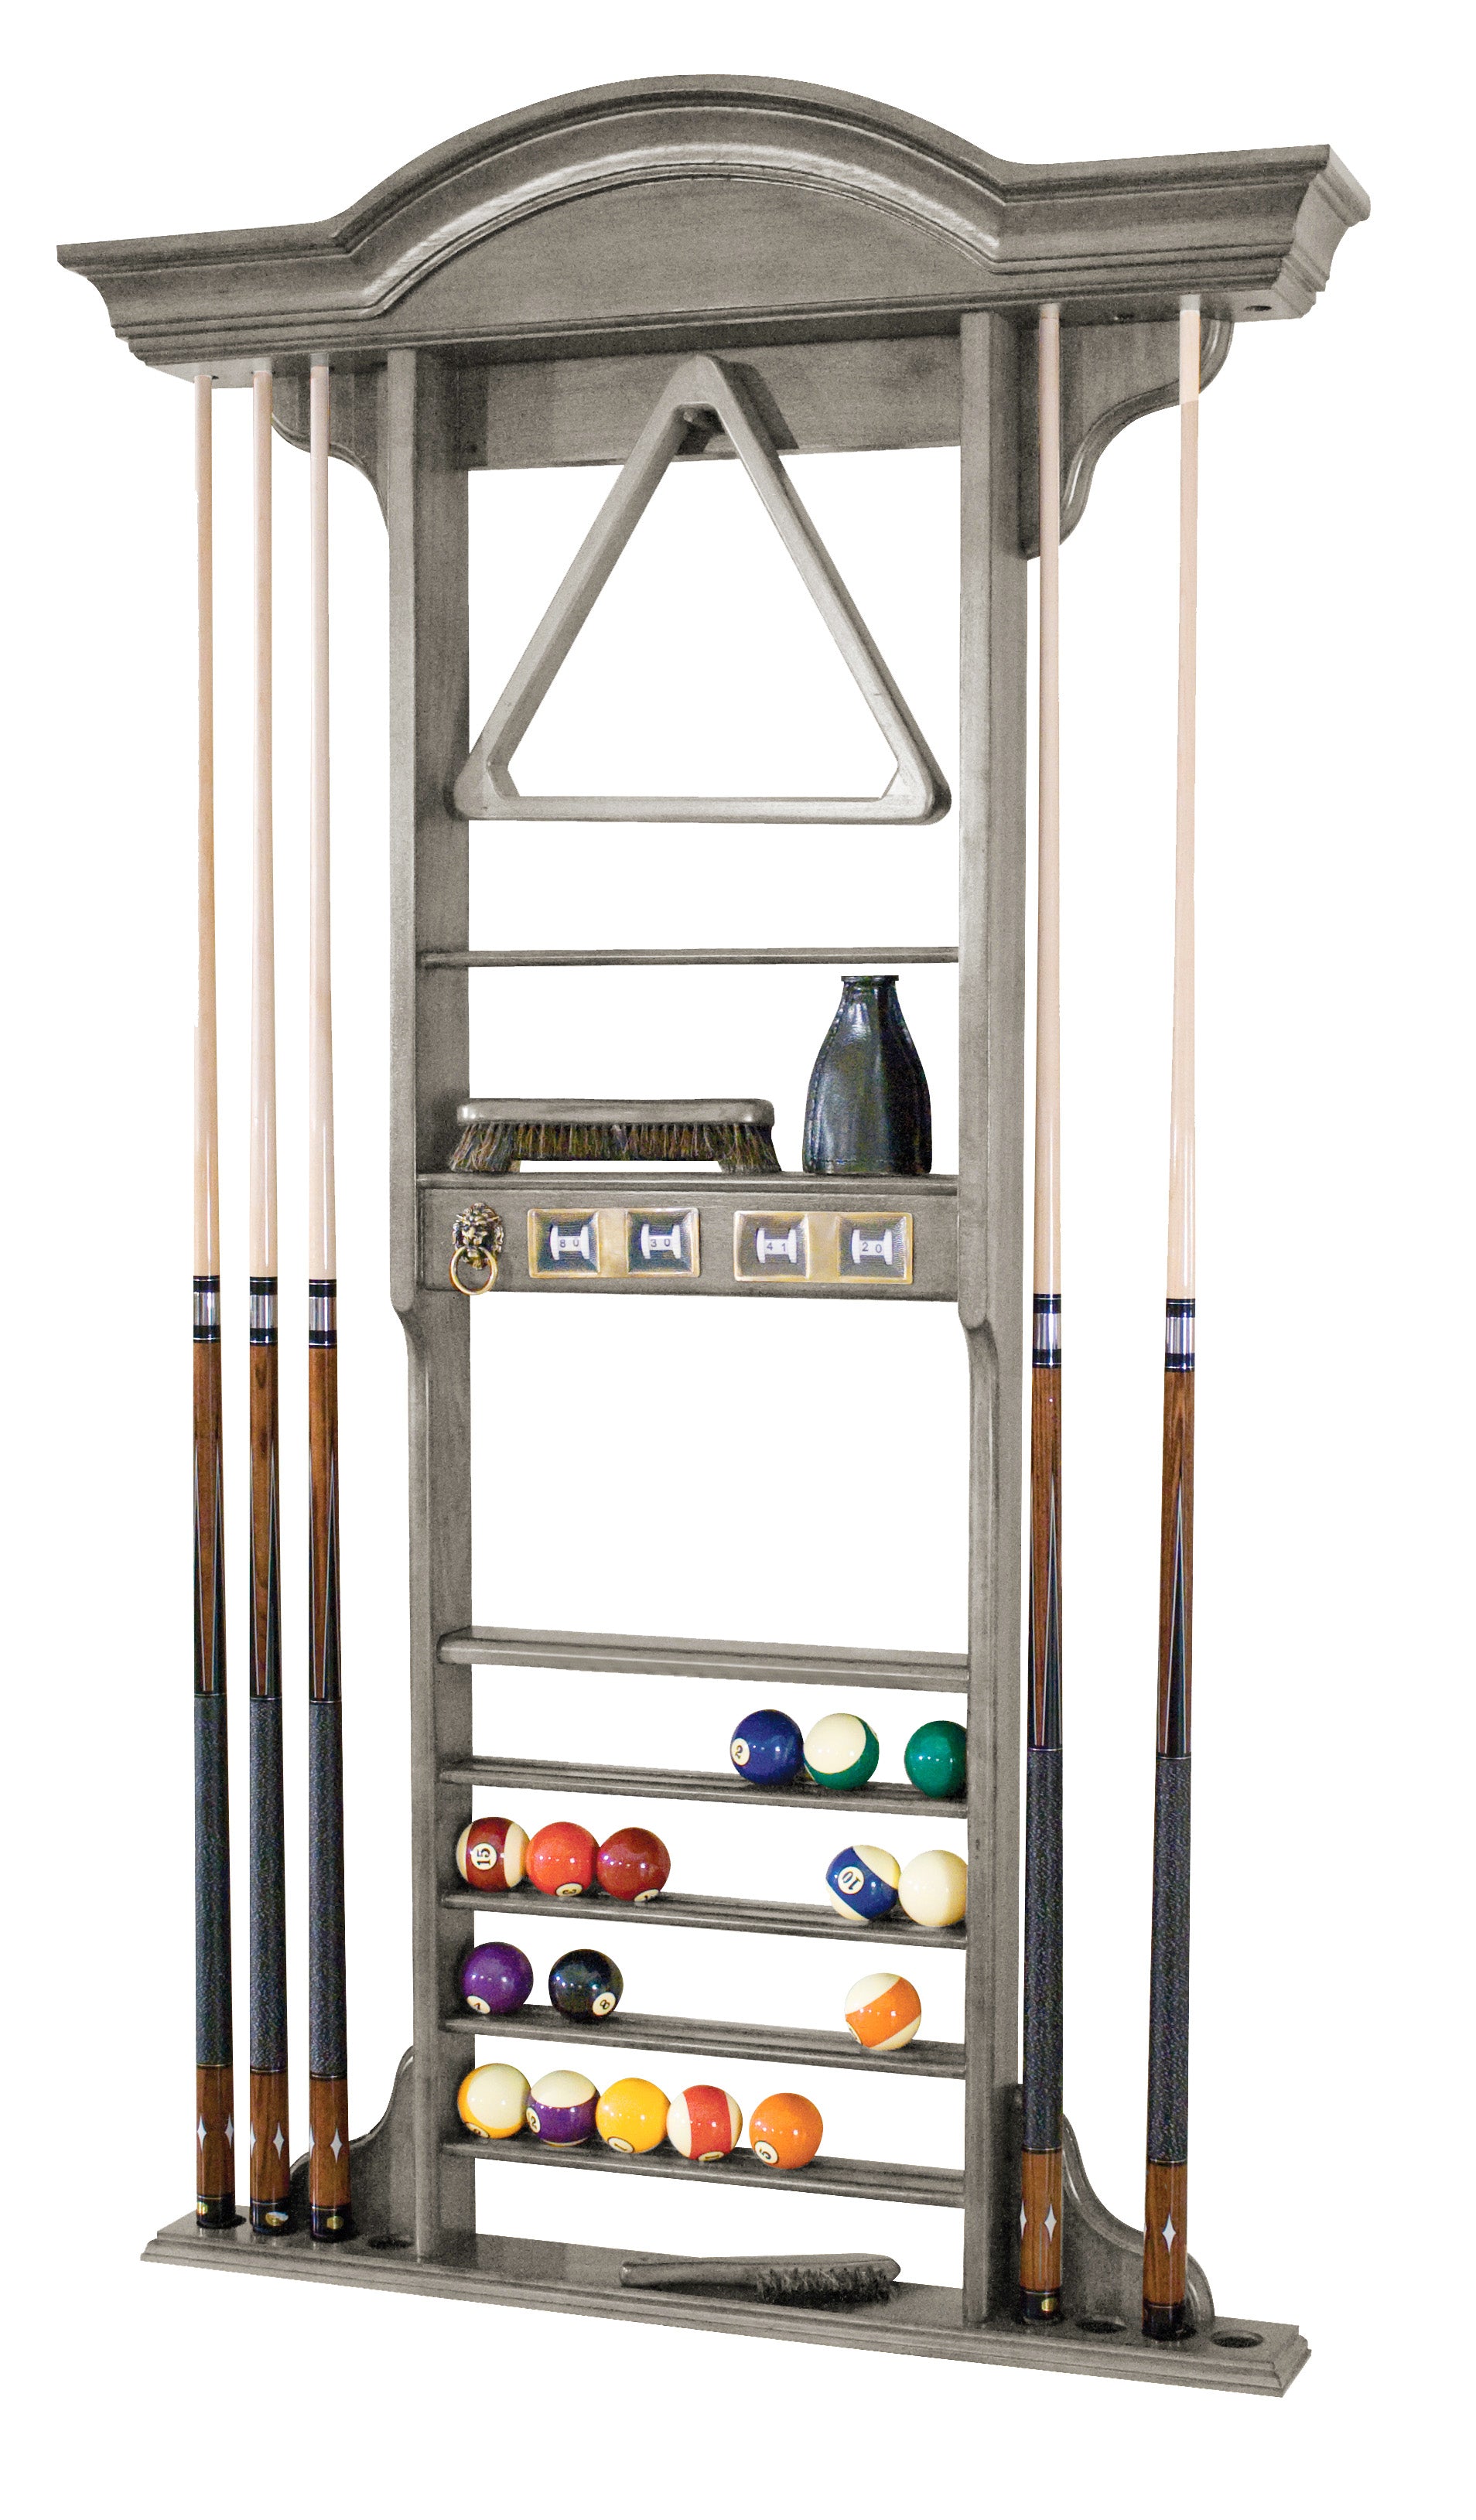 Legacy Billiards Classic Wall Cue Rack in Overcast Finish